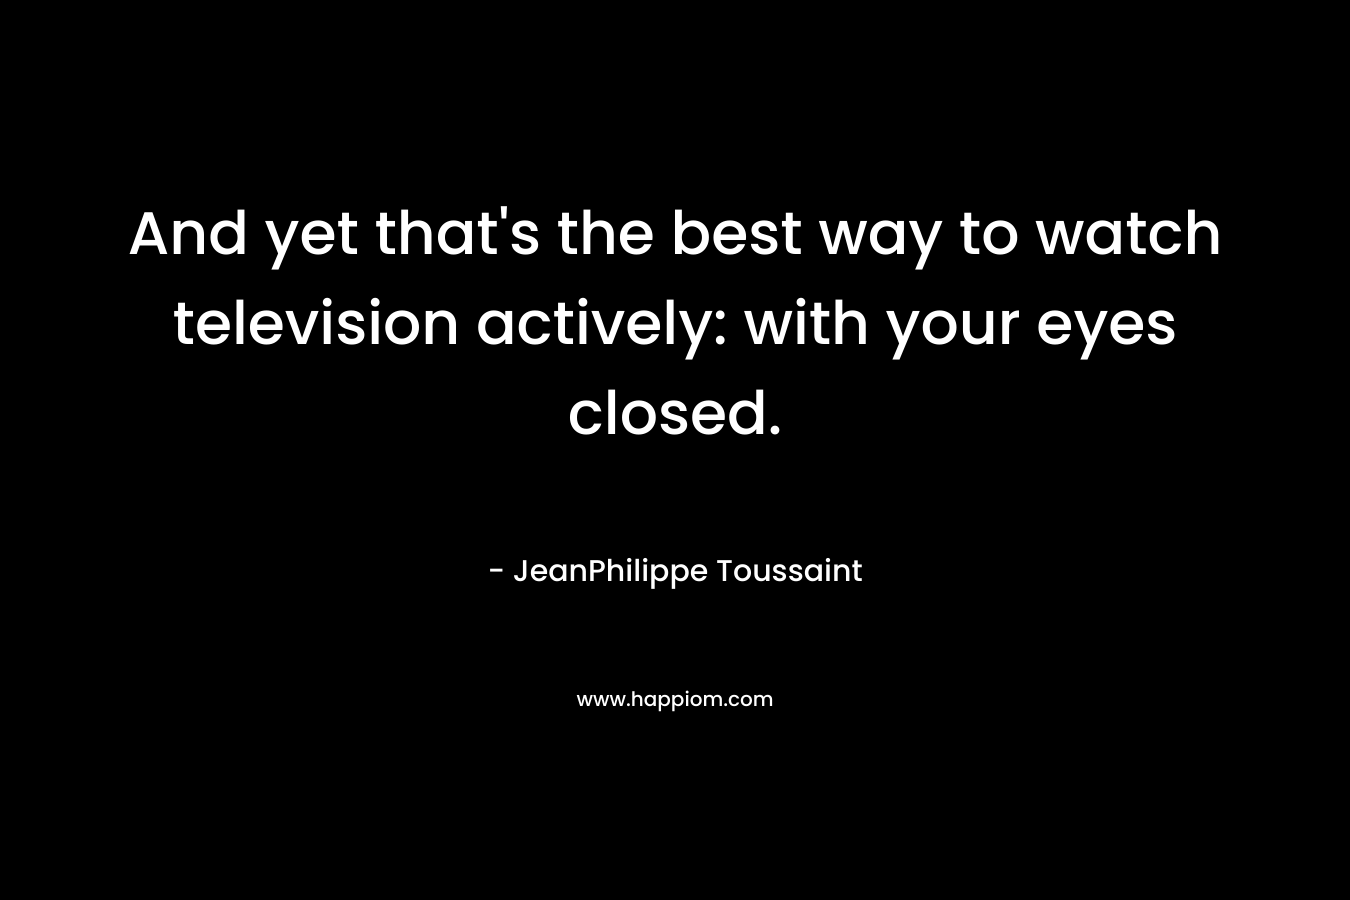 And yet that’s the best way to watch television actively: with your eyes closed. – JeanPhilippe Toussaint